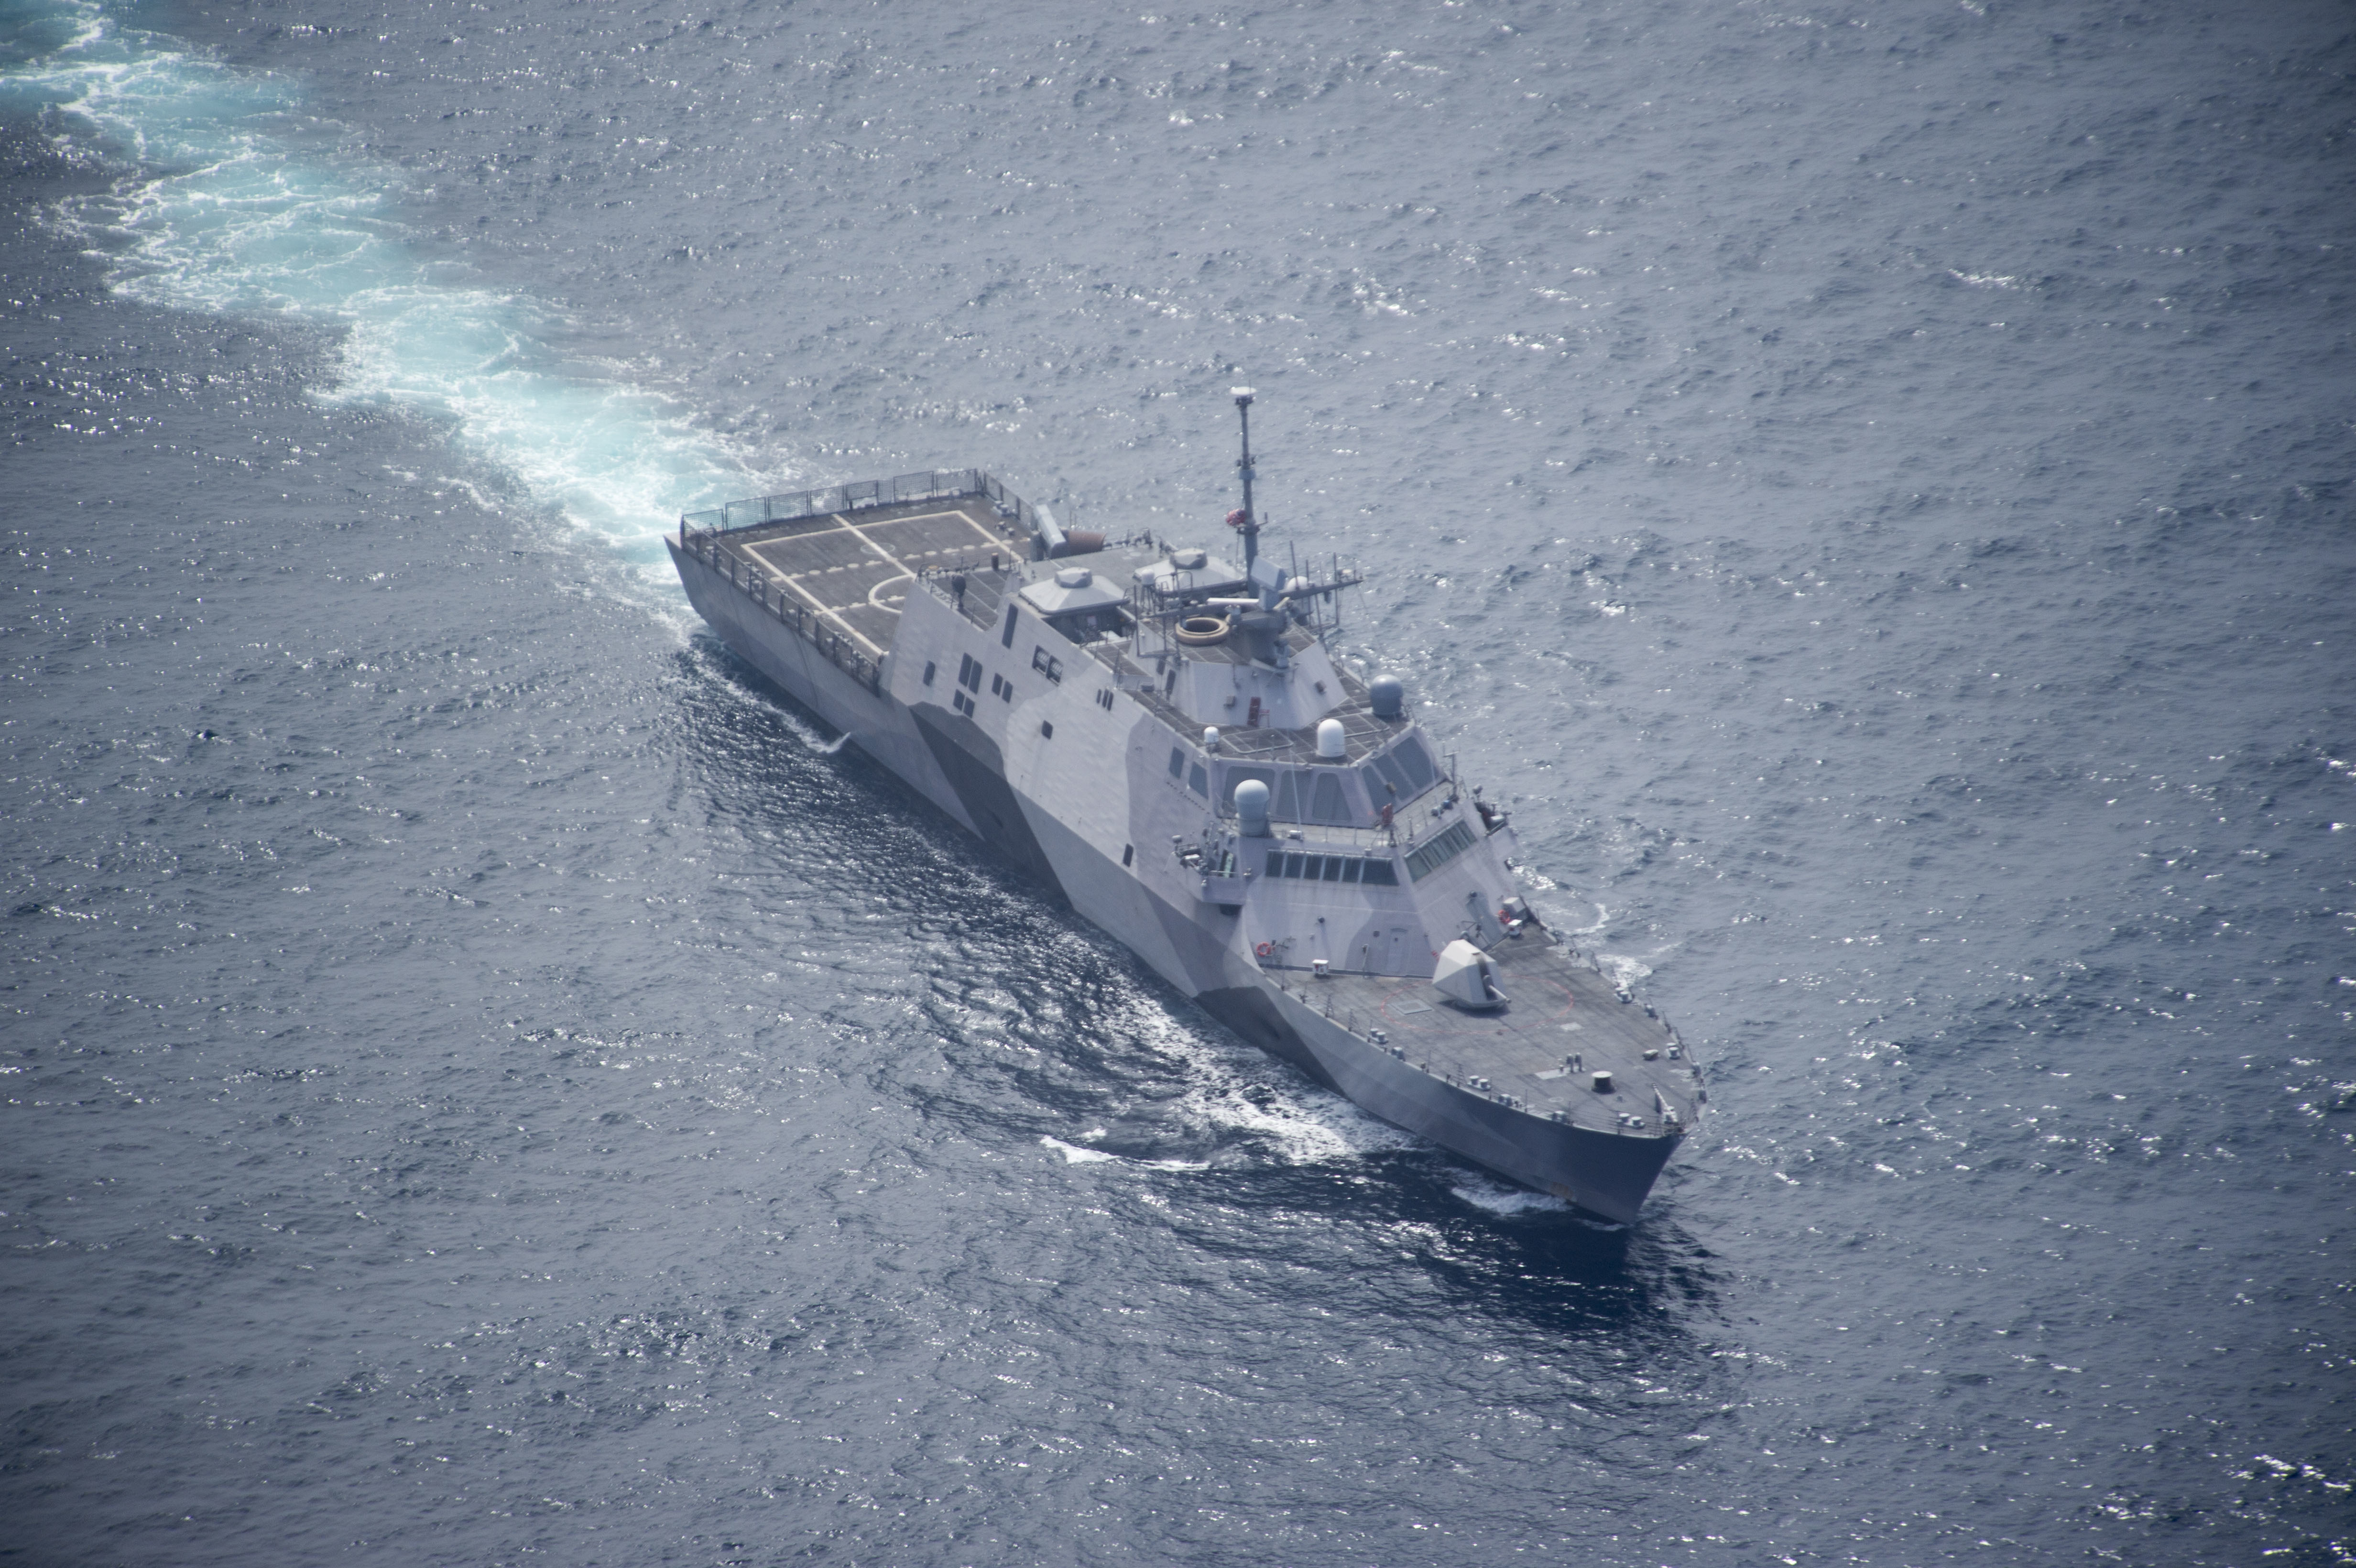 The littoral combat ship USS Freedom (LCS 1) transits the Pacific Ocean after departing Naval Base San Diego July 9, to participate in the Rim of the Pacific 2016 exercise. The engineering casualty that led to the engine damage happened this day, during transit from San Diego to Hawaii for the Rim of the Pacific exercise. US Navy photo.